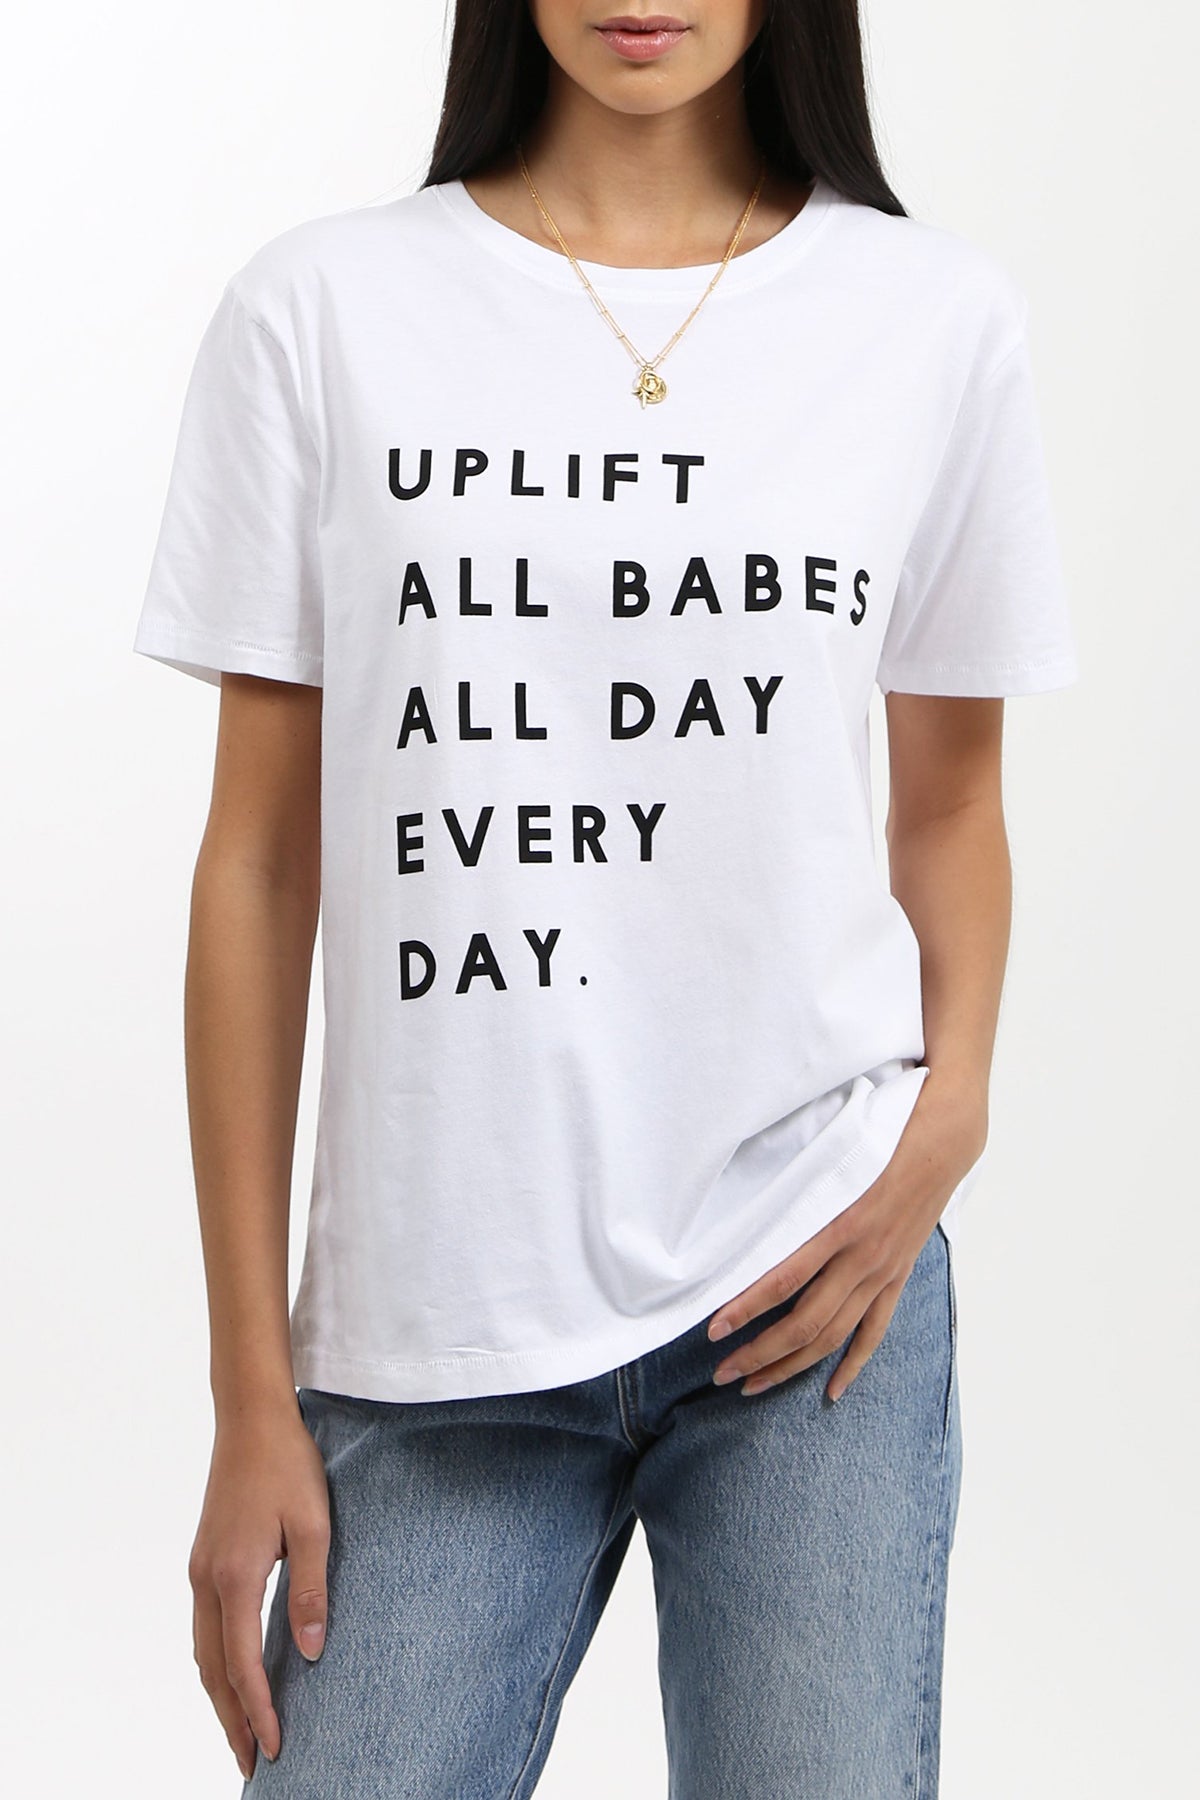 Uplift all babes, all day, everyday.